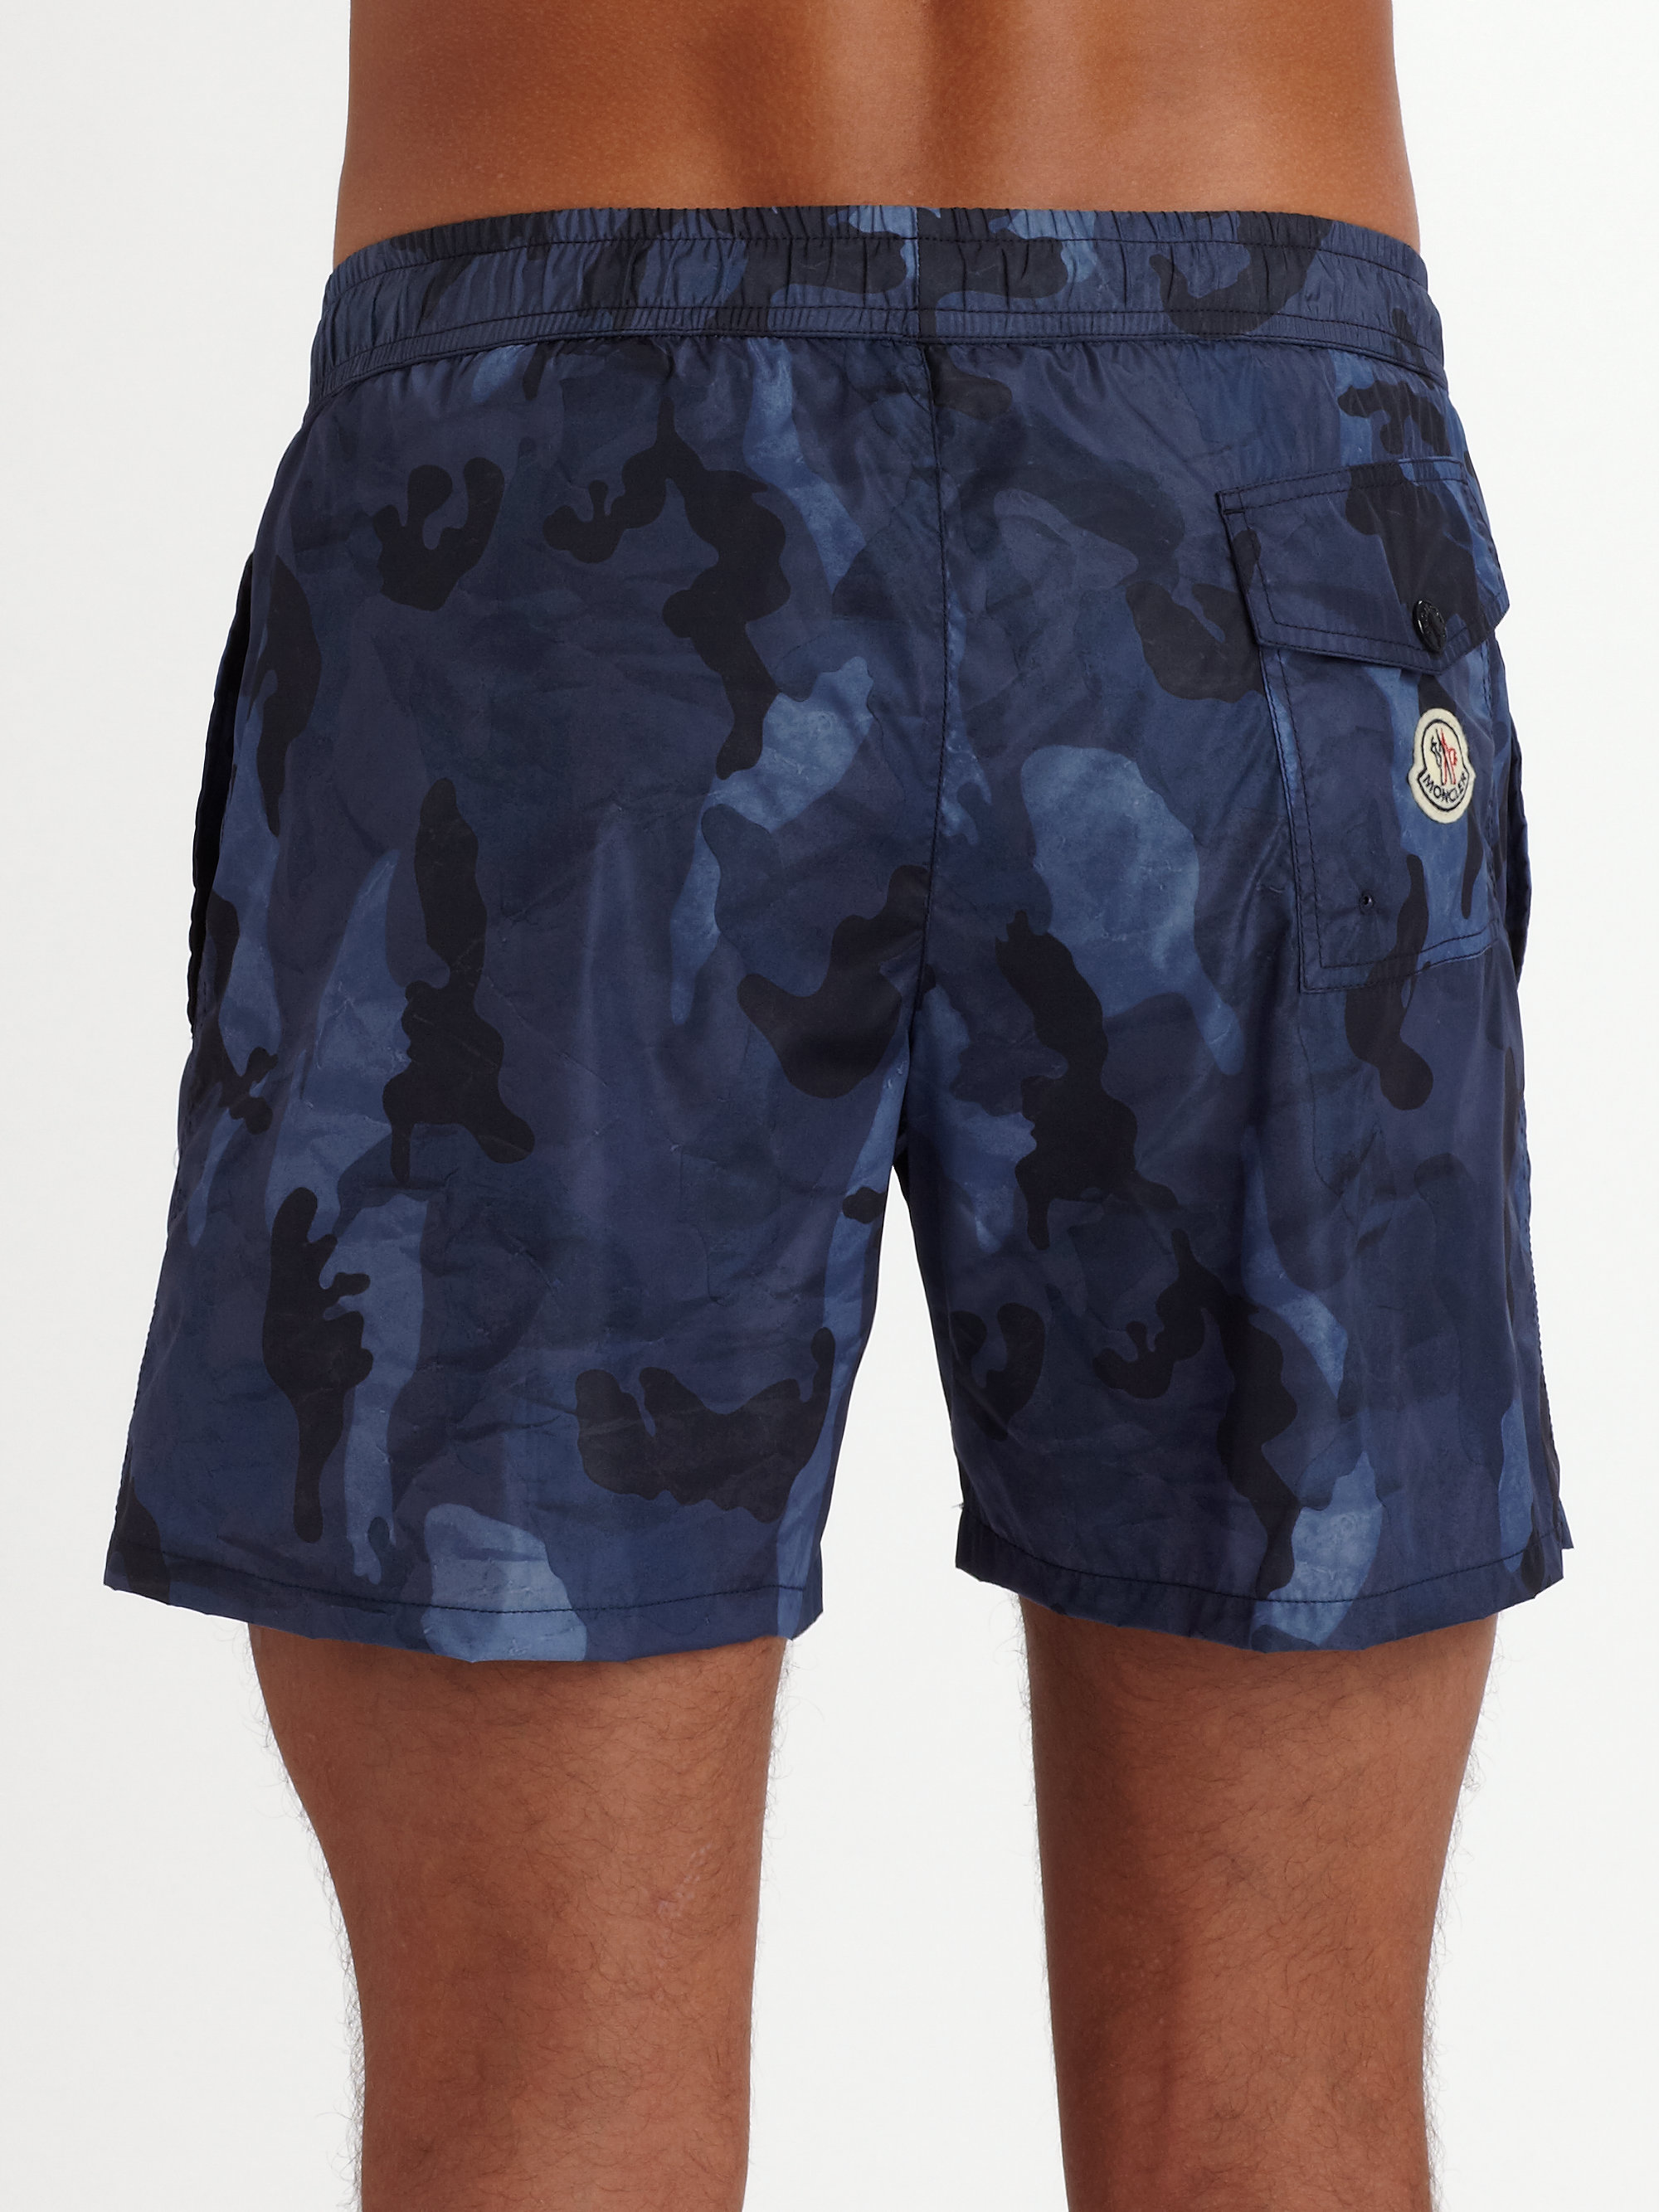 Moncler Camo Swim Shorts in Military (Blue) for Men - Lyst